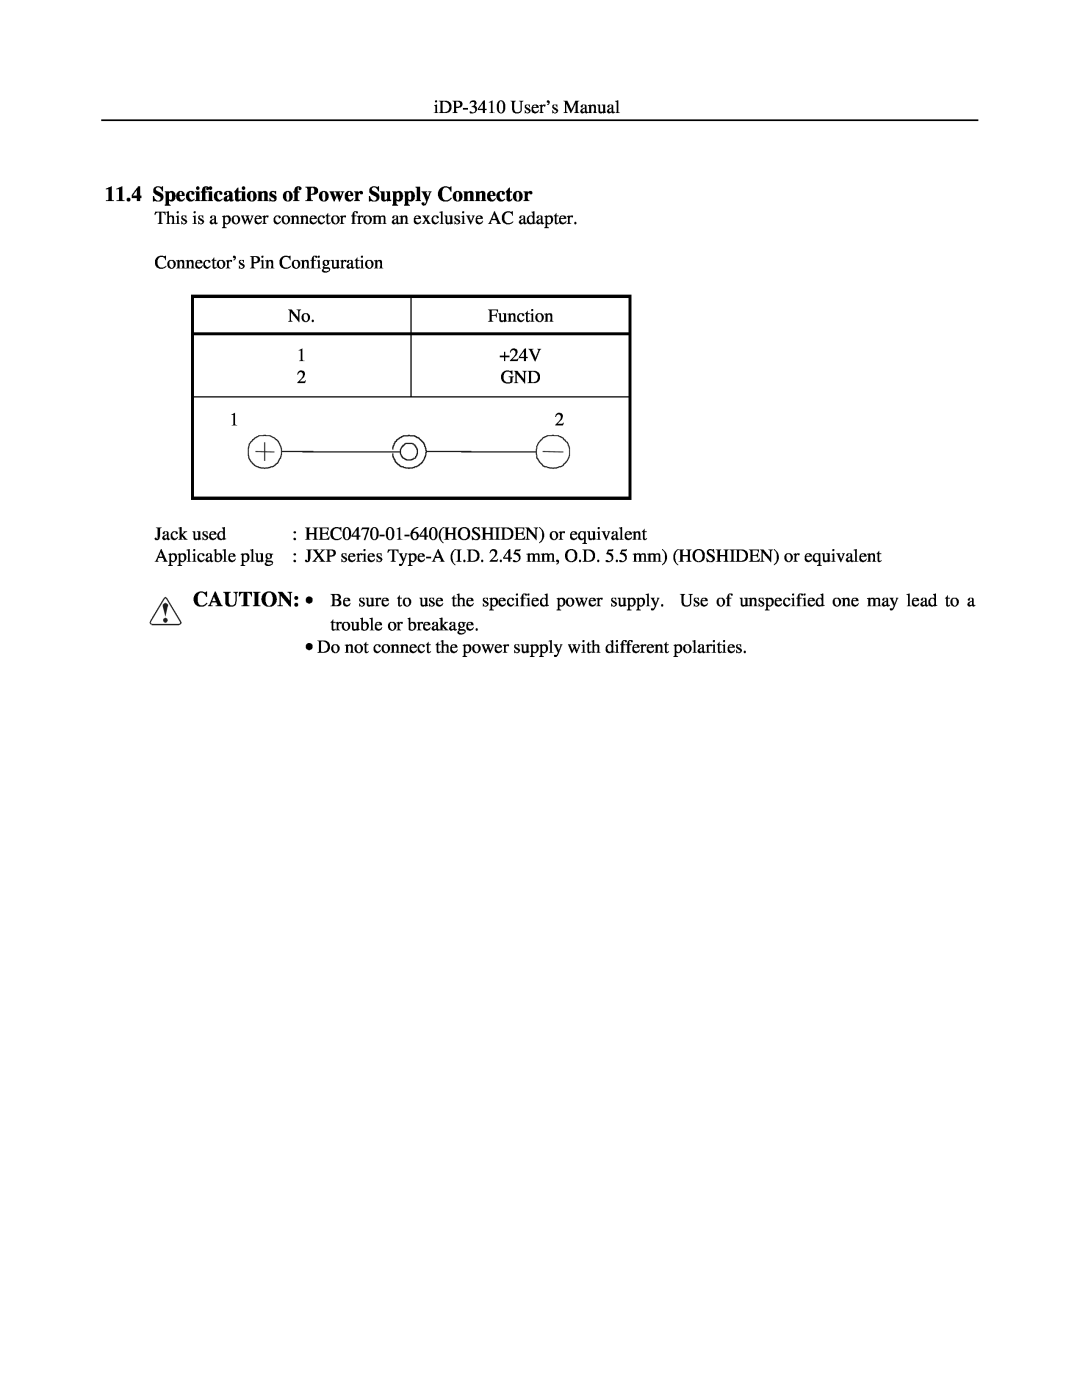 Addlogix iDP-3410 user manual Specifications of Power Supply Connector 